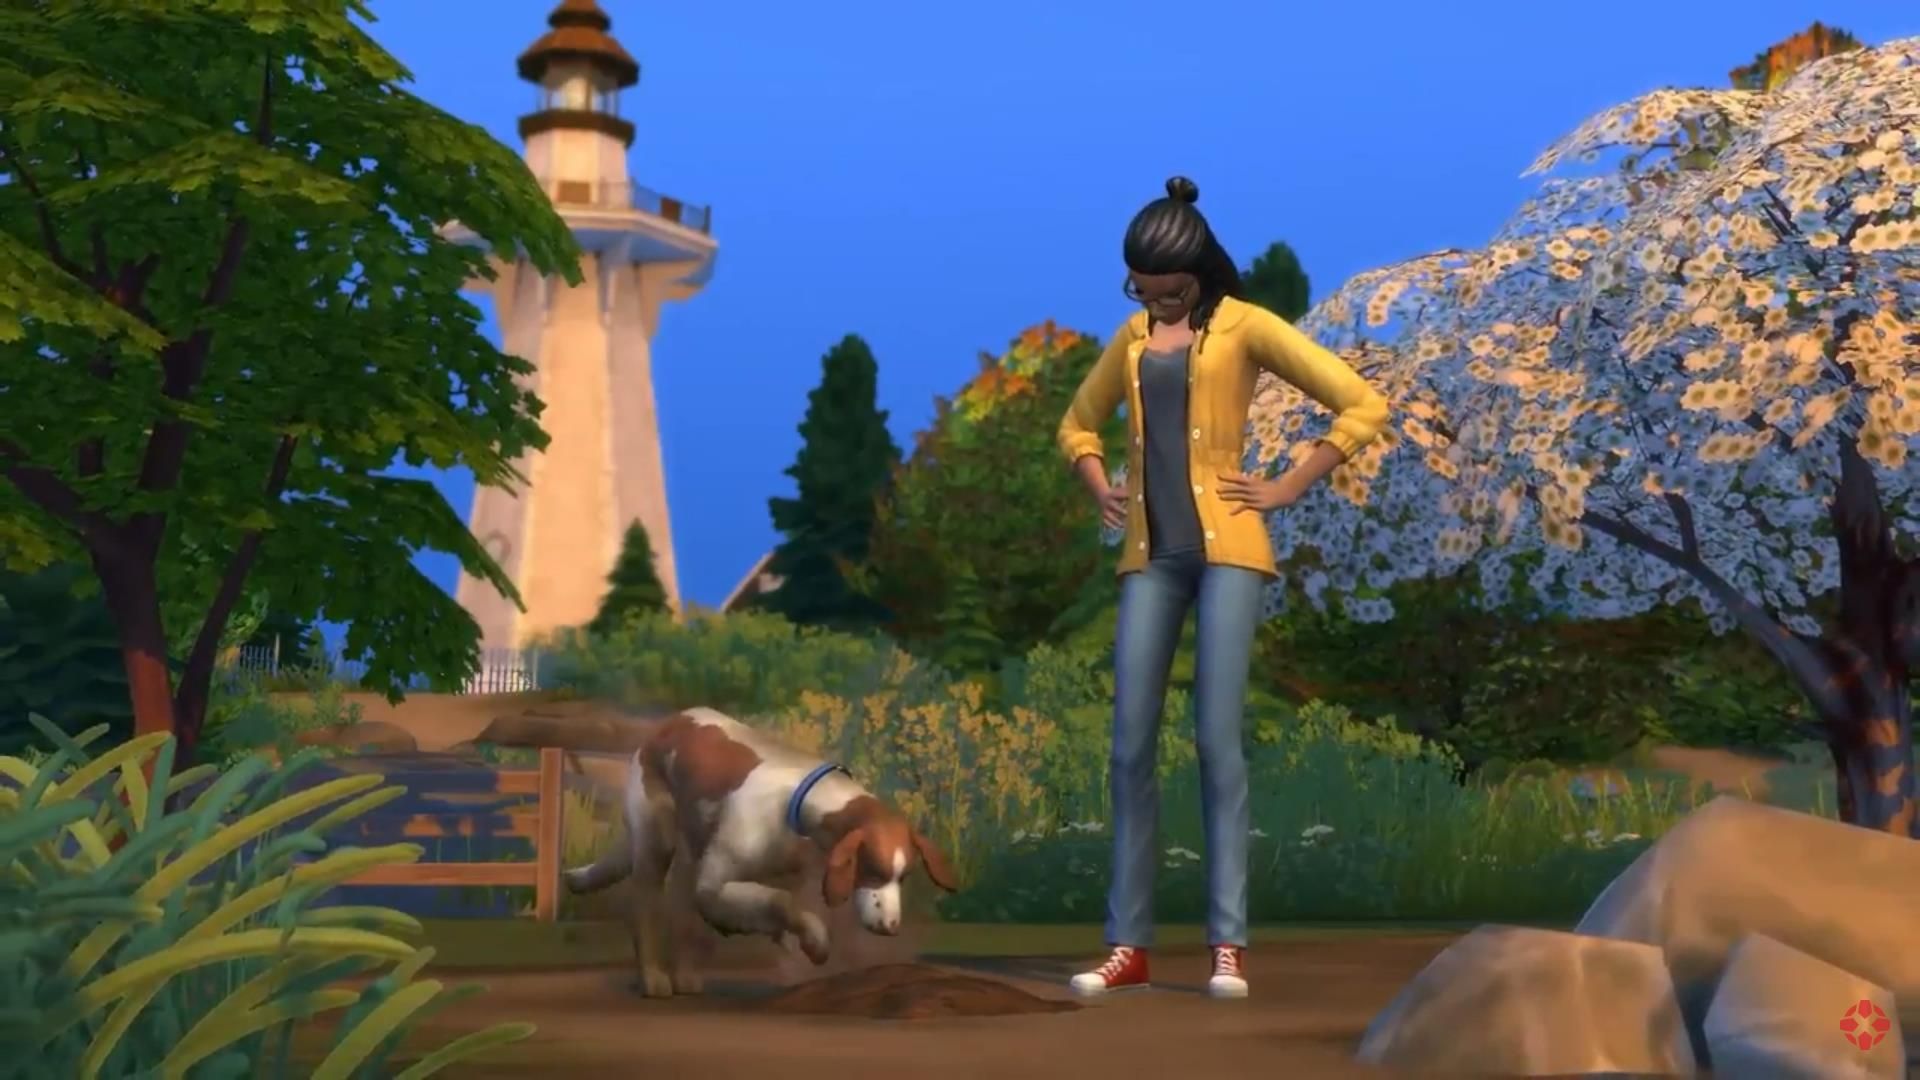 Screenshot of the Cats and Dogs expansion of The Sims 4 life simulation game.